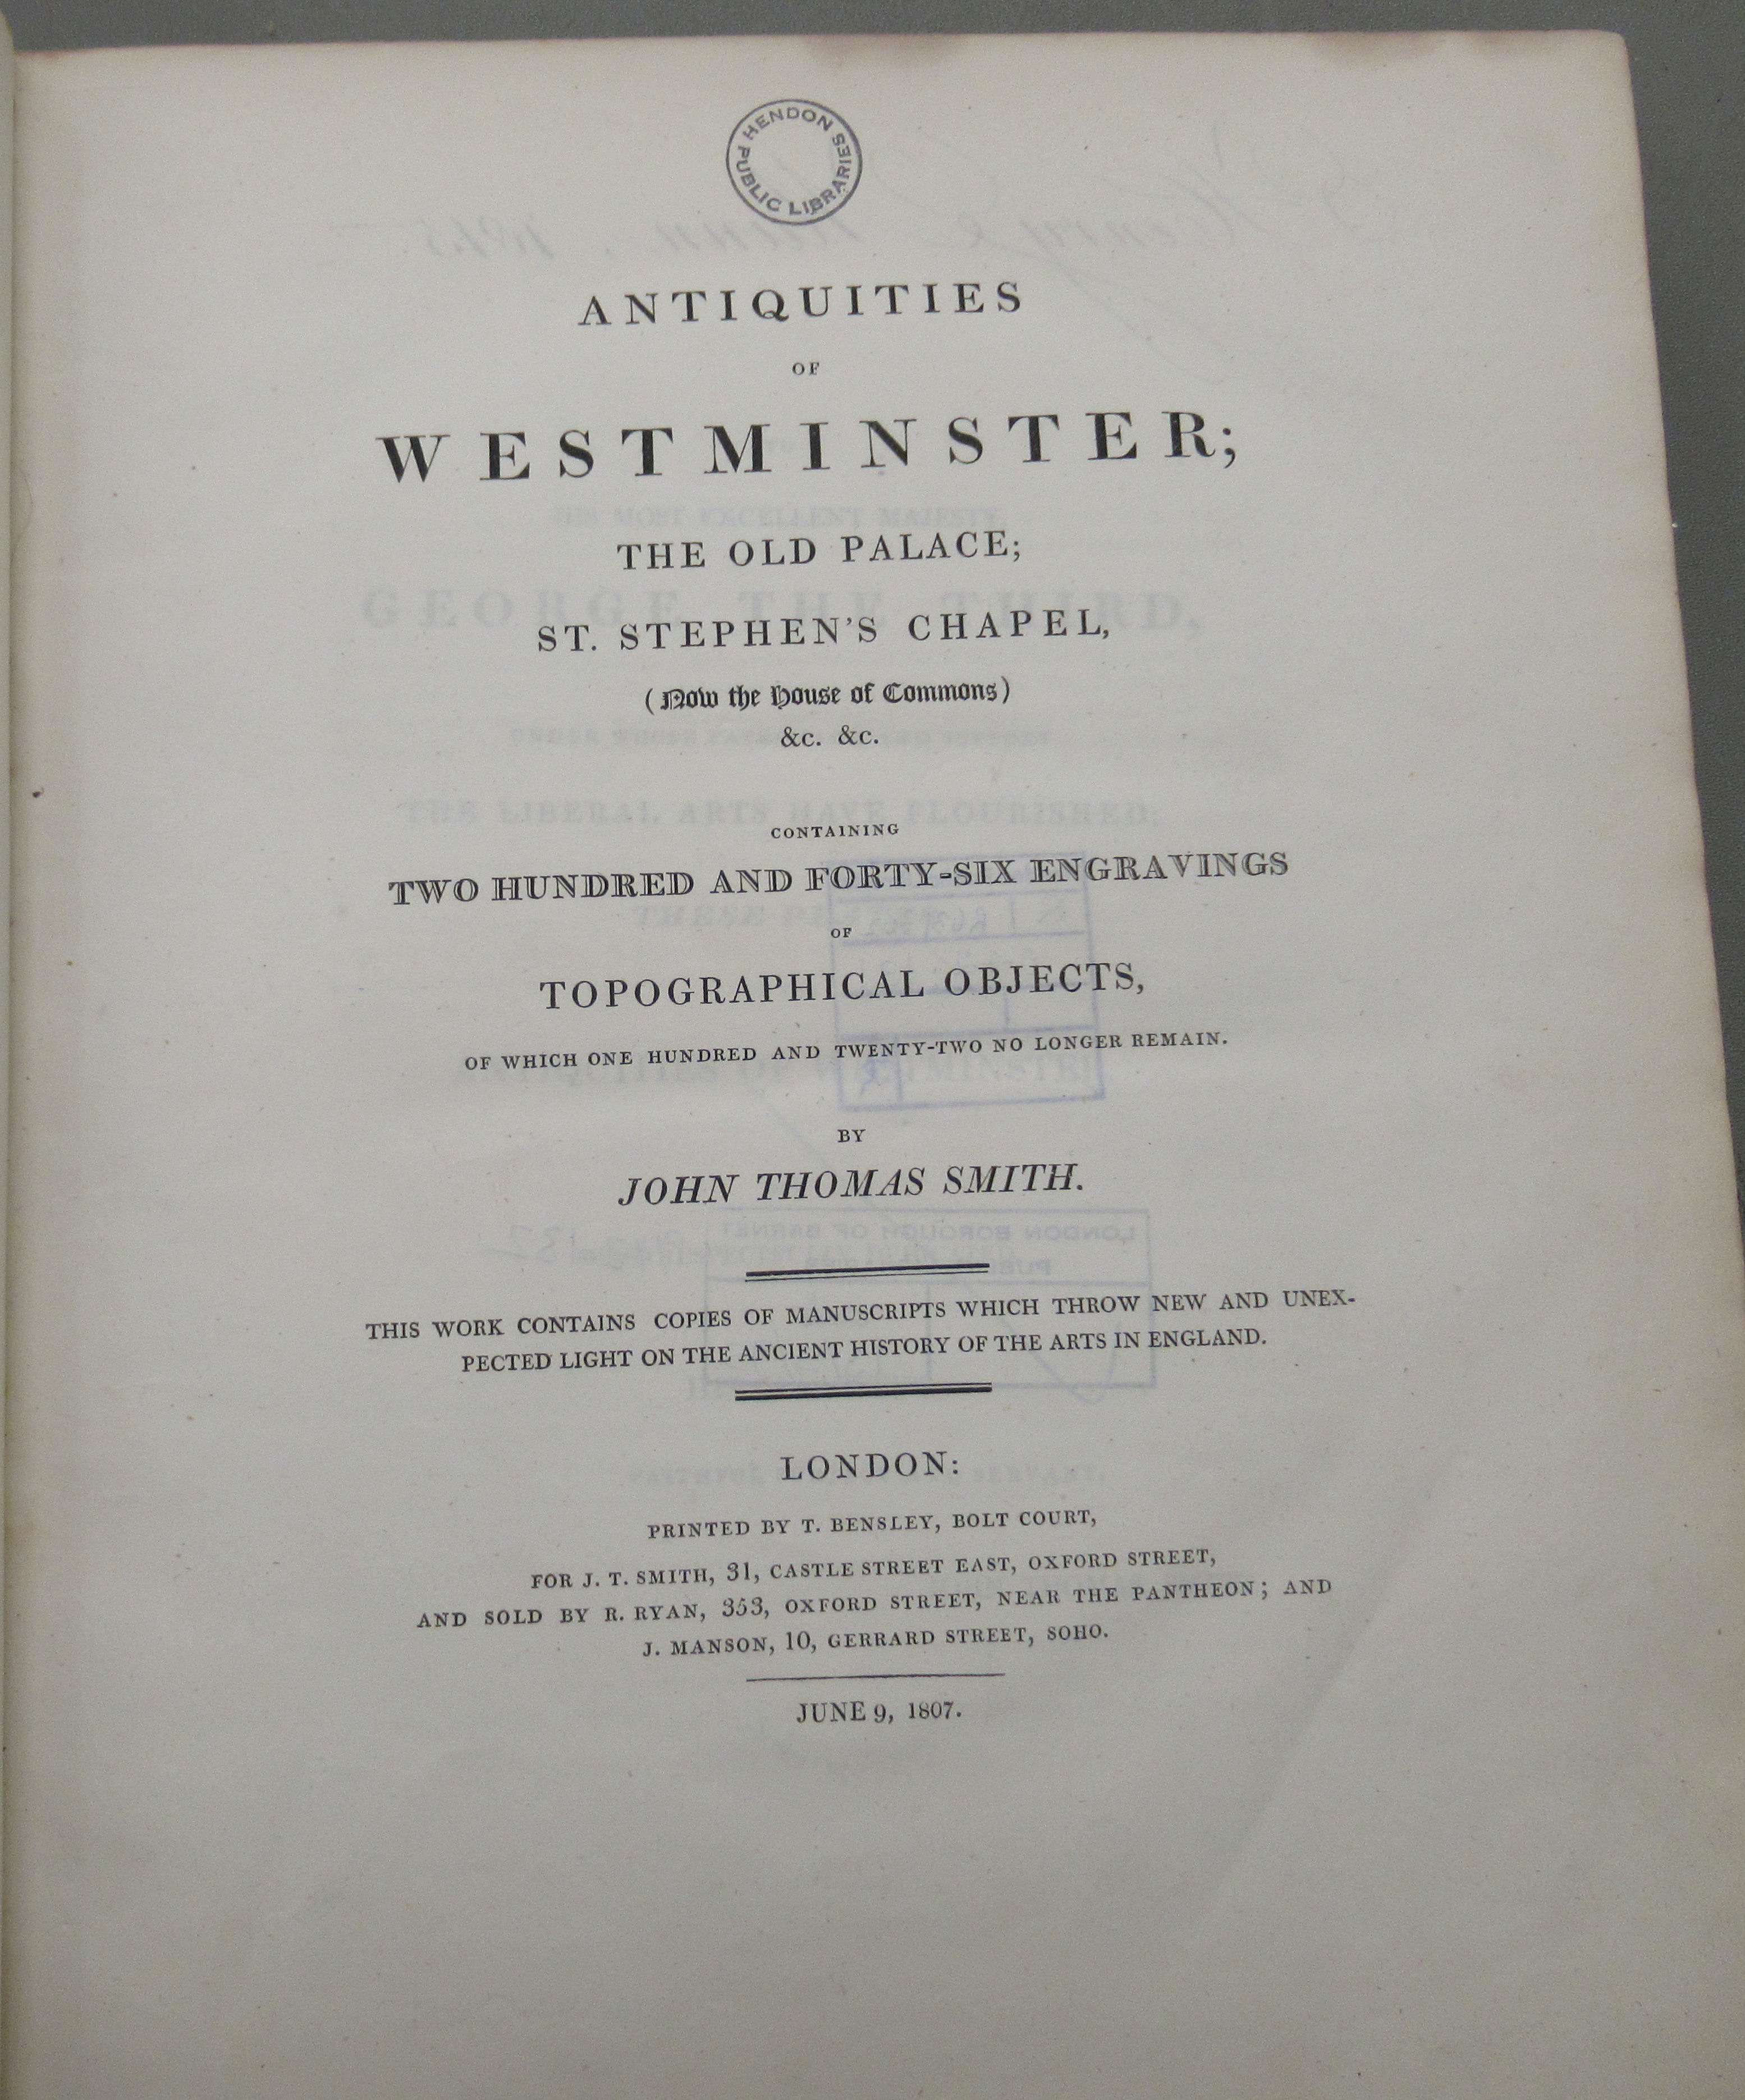 Book: 'Antiquities of Westminster, The Old Palace, St Stephen's Chapel etc' by John Thomas Smith - Image 4 of 6